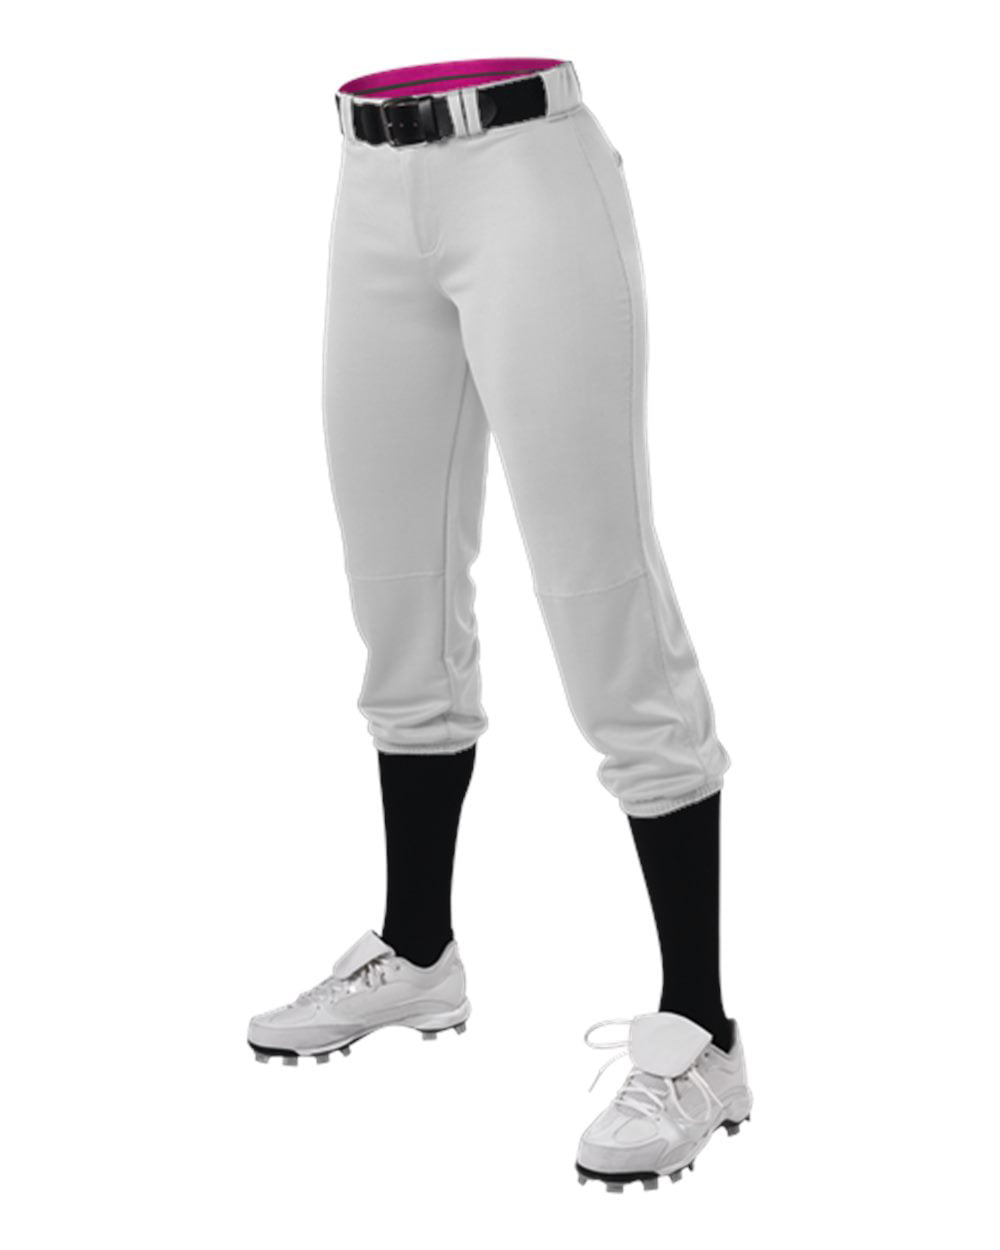 Details about   New Alleson Athletic Baseball Pants Size S Small Youth Boys Girls Gray Softball 